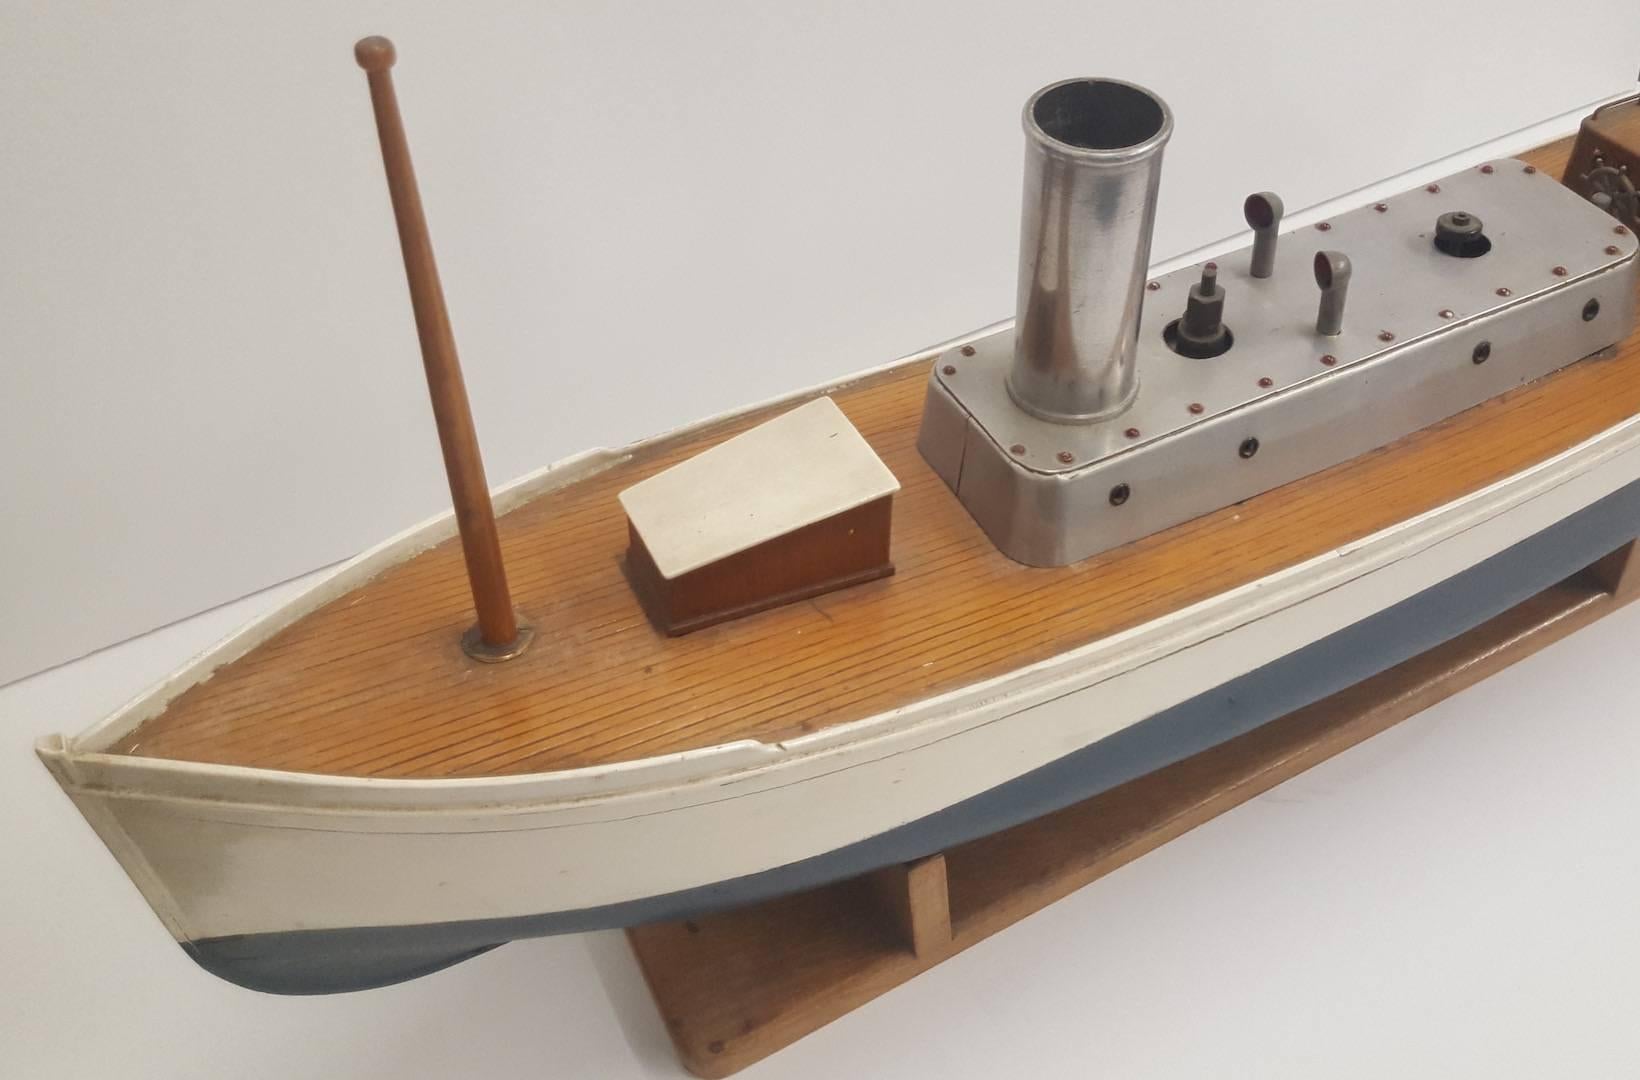 Painted model pond boat powered by a steam engine. Owned by current collector over 25 years without ever sailing the model. Metal (perhaps aluminium) centre parts on upper deck, including smoke stack, hand wheel, rudder, and air vents. Beautiful